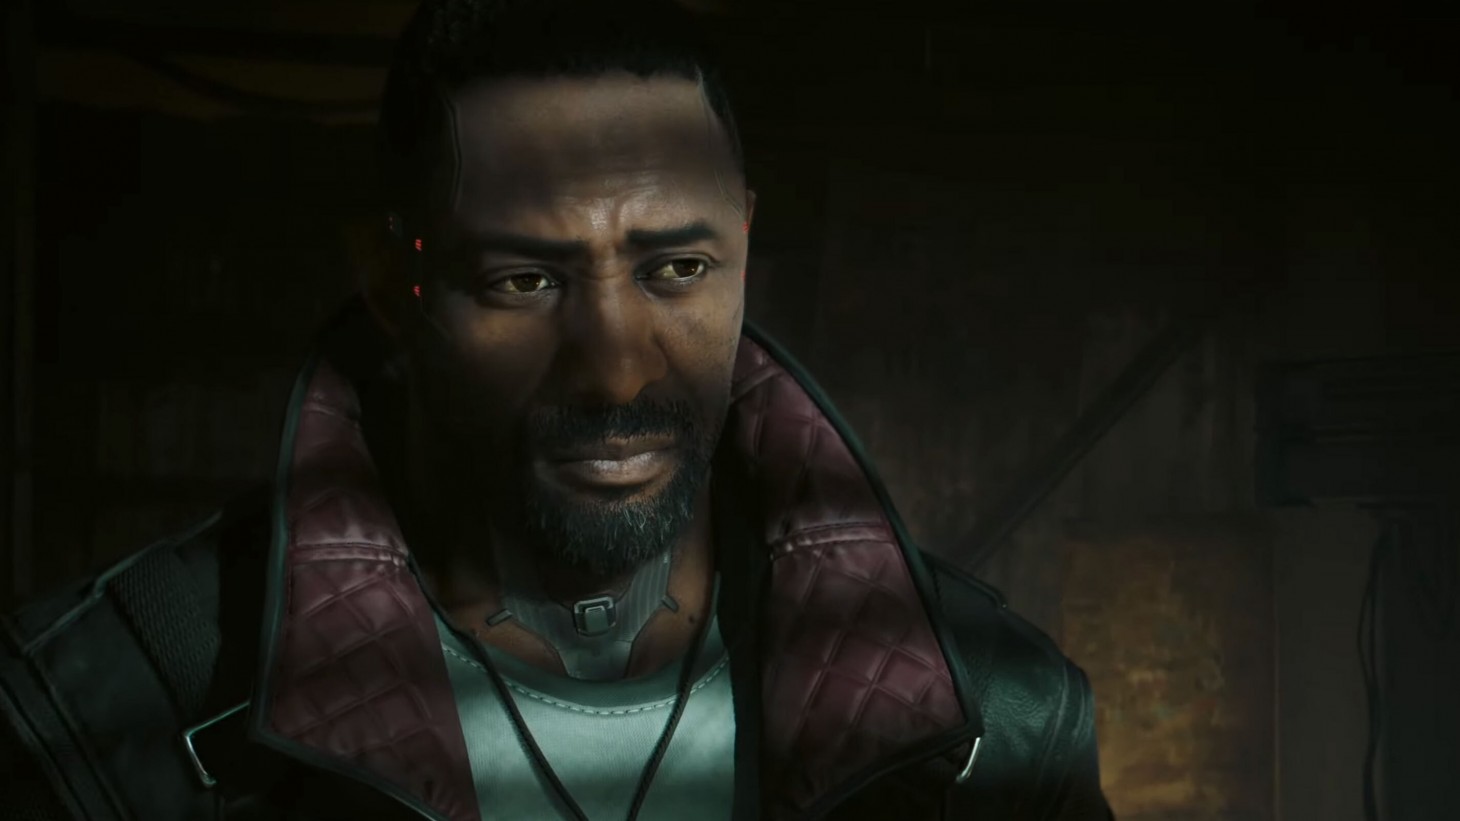 You can now party with Keanu Reeves and Idris Elba in Cyberpunk 2077